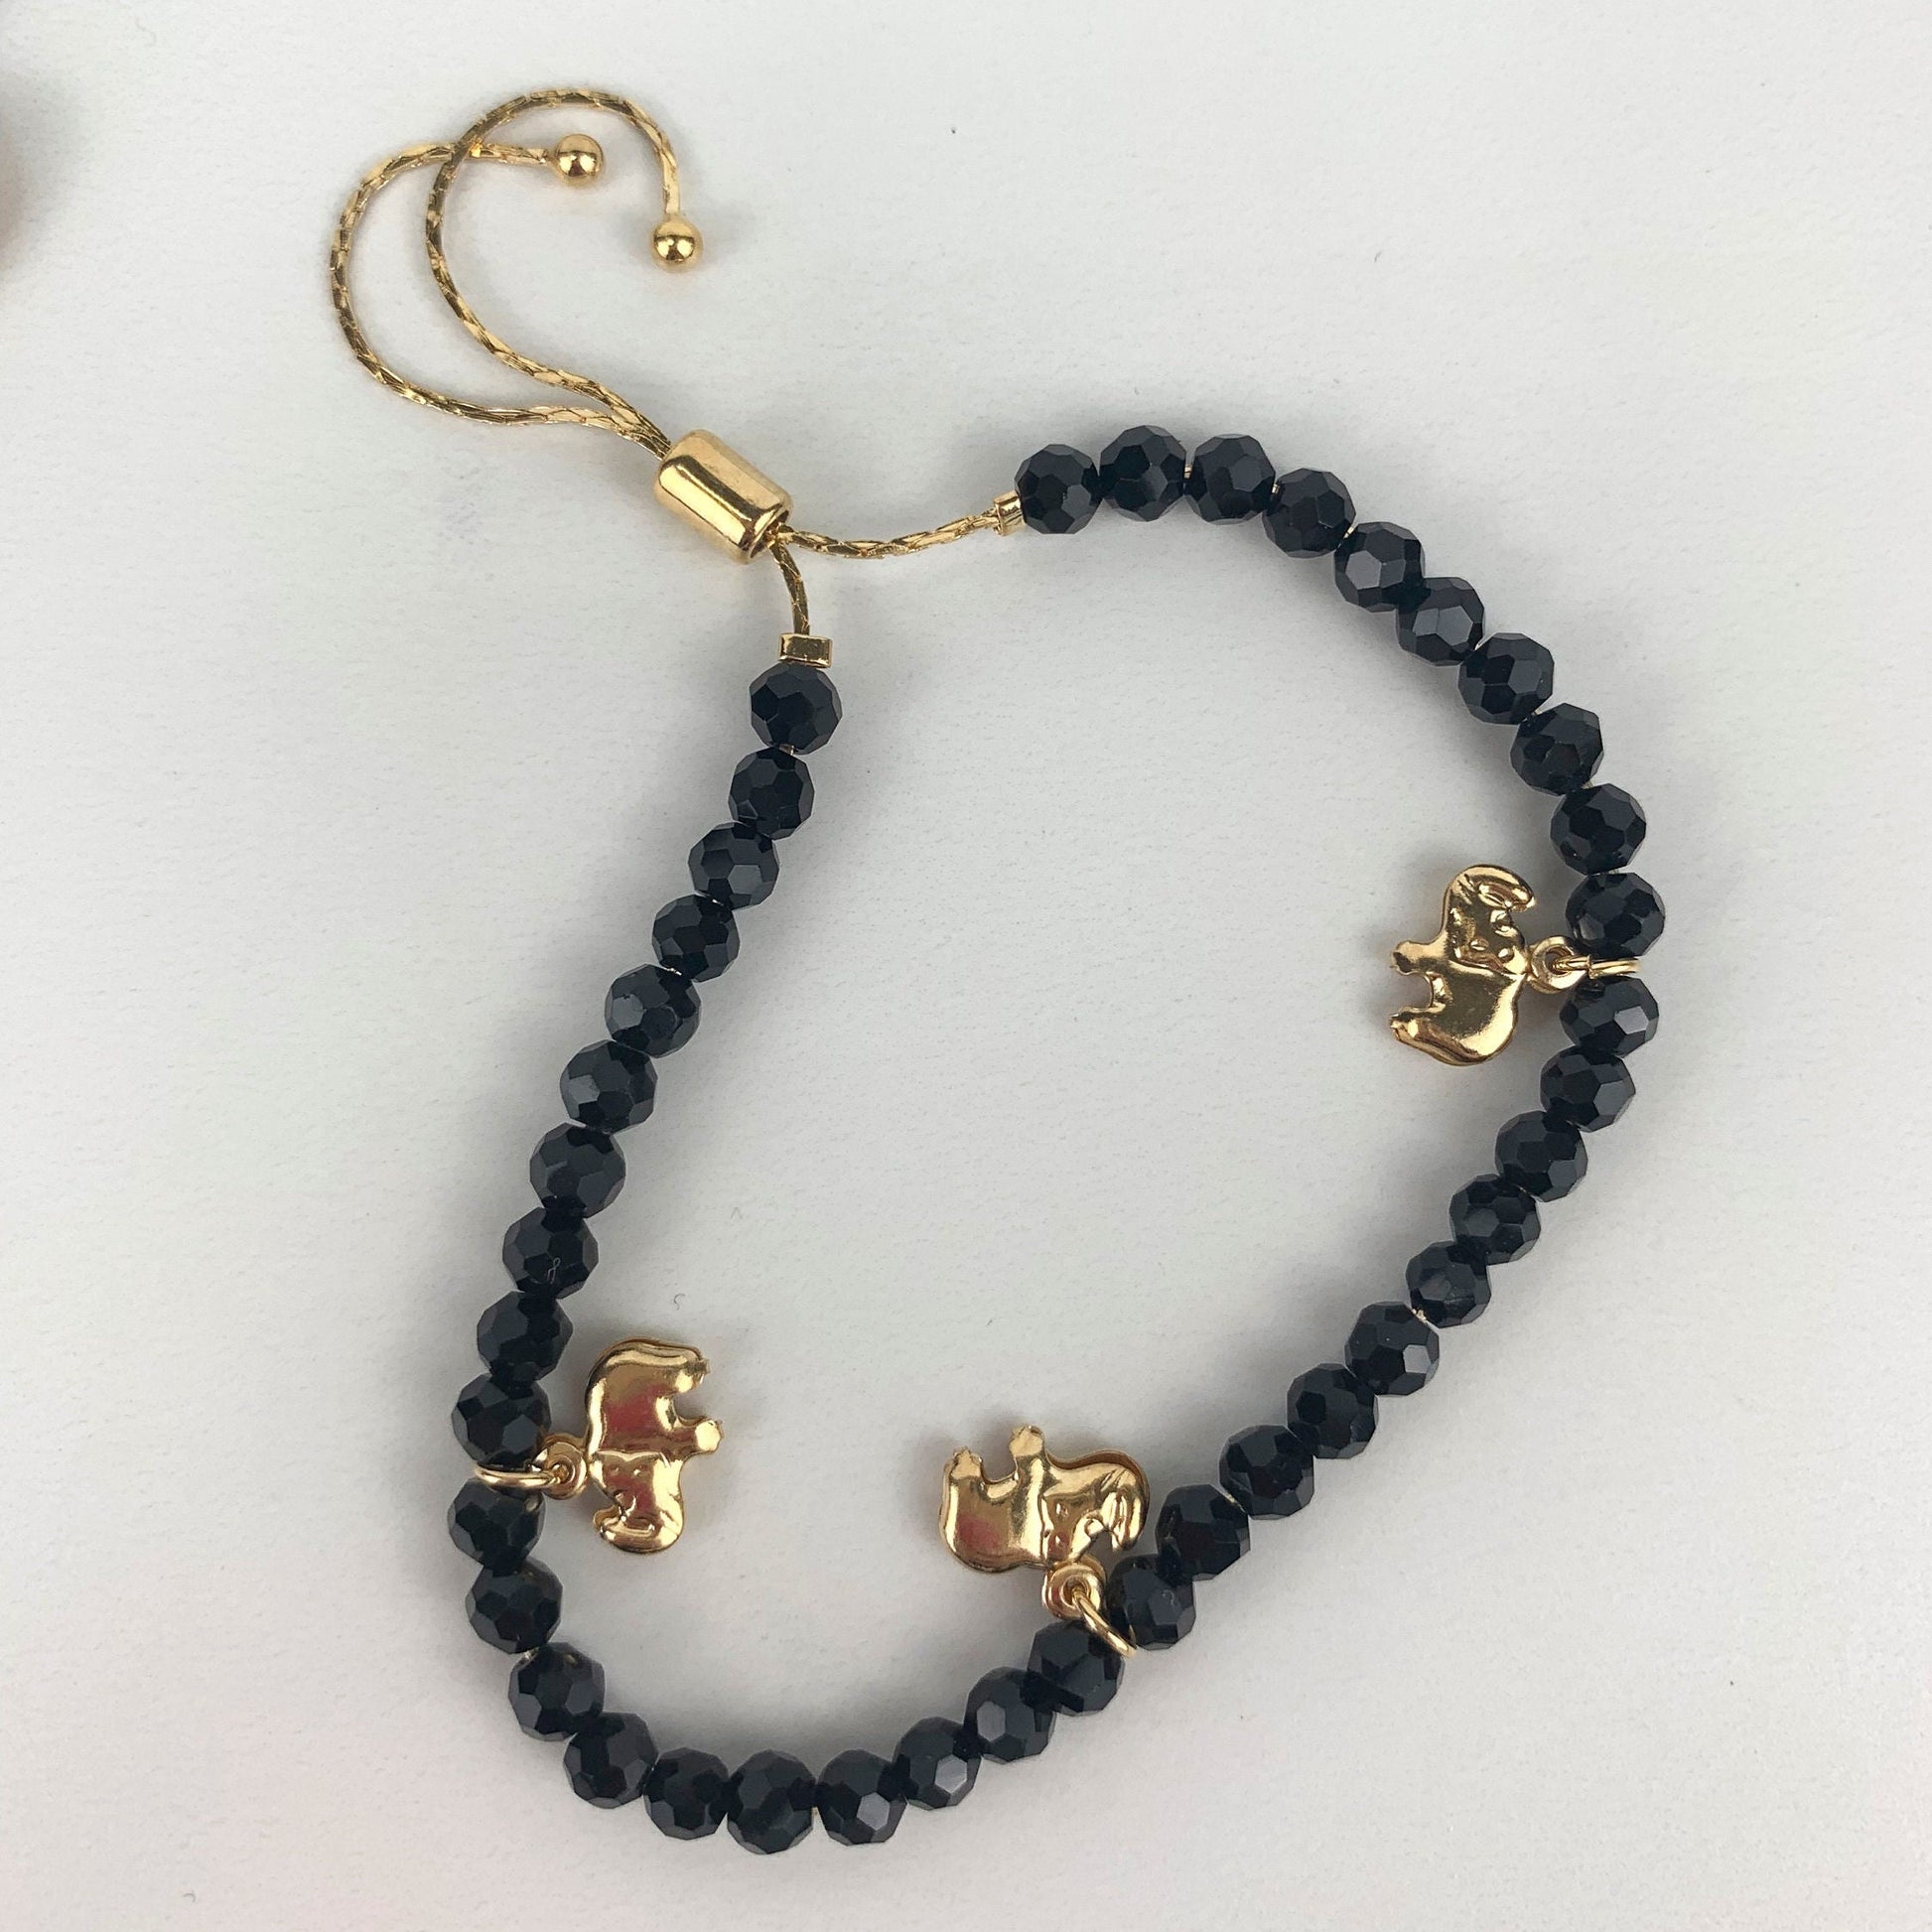 18k Gold Filled 1mm Snake Chain, Black Beads Adjustable Bracelet with Elephants, Cross or Dove Charms Wholesale Jewelry Supplies